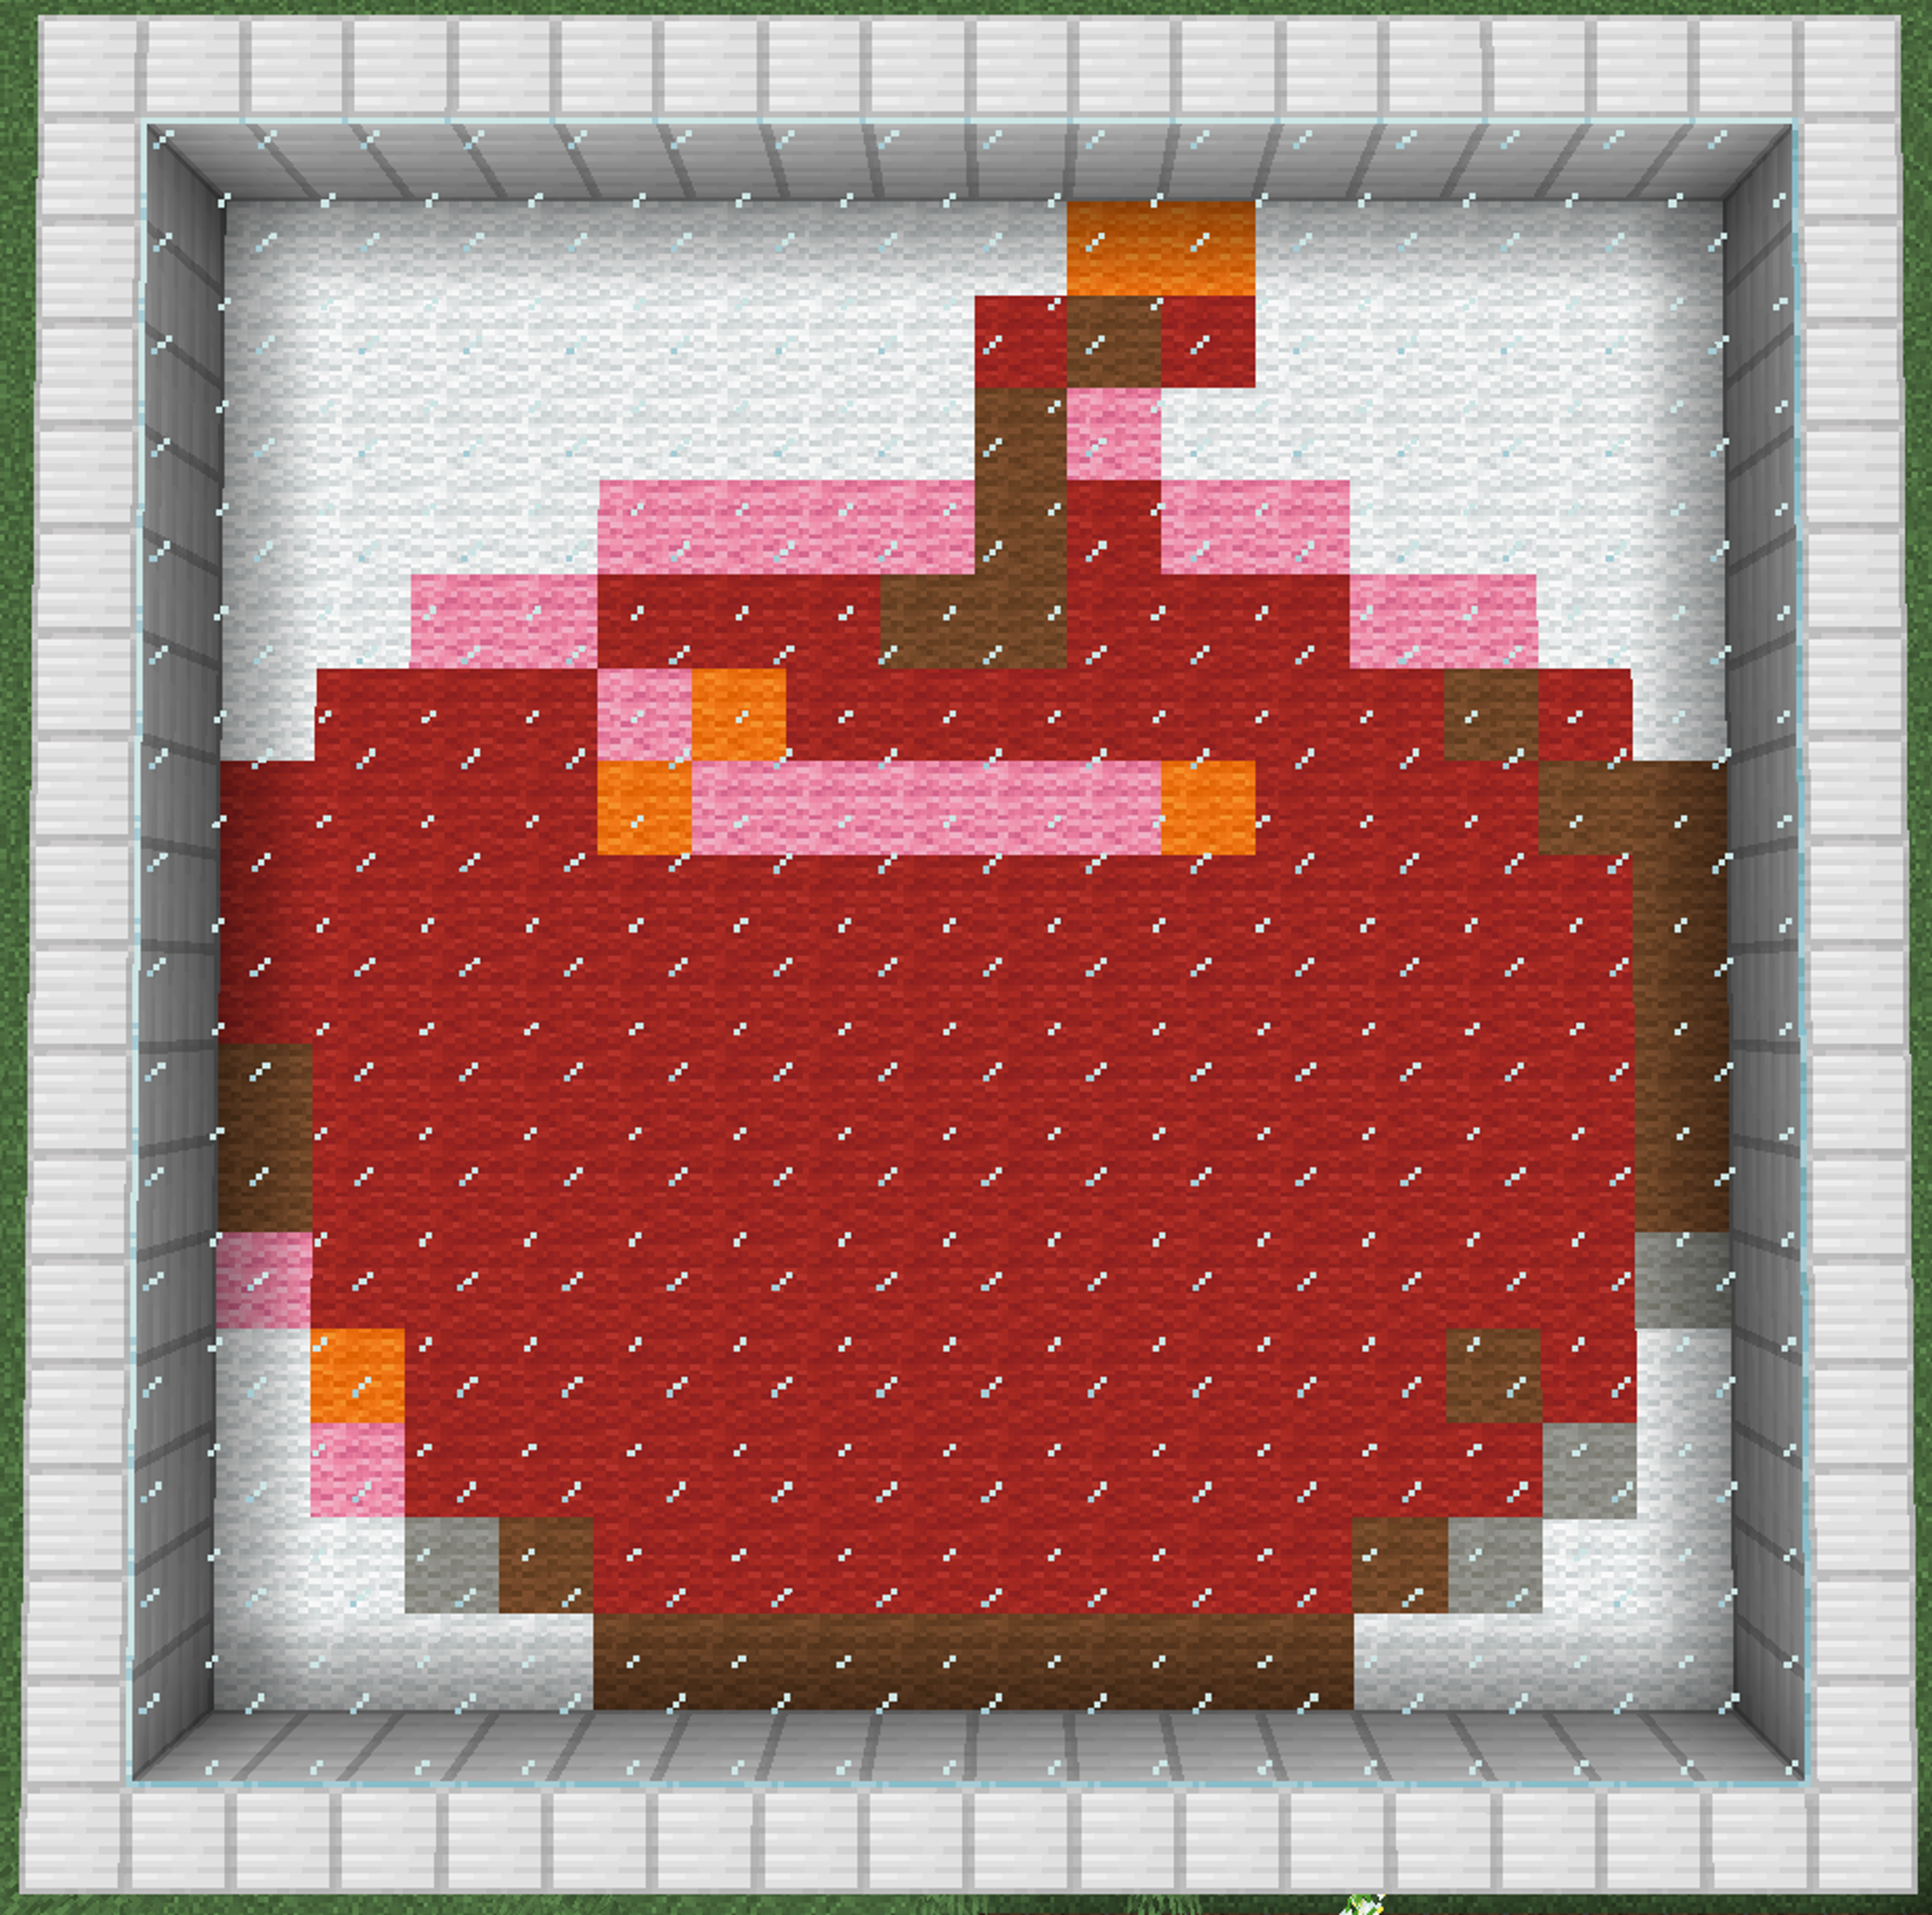 The canvas structure, now filled with wool art of an apple